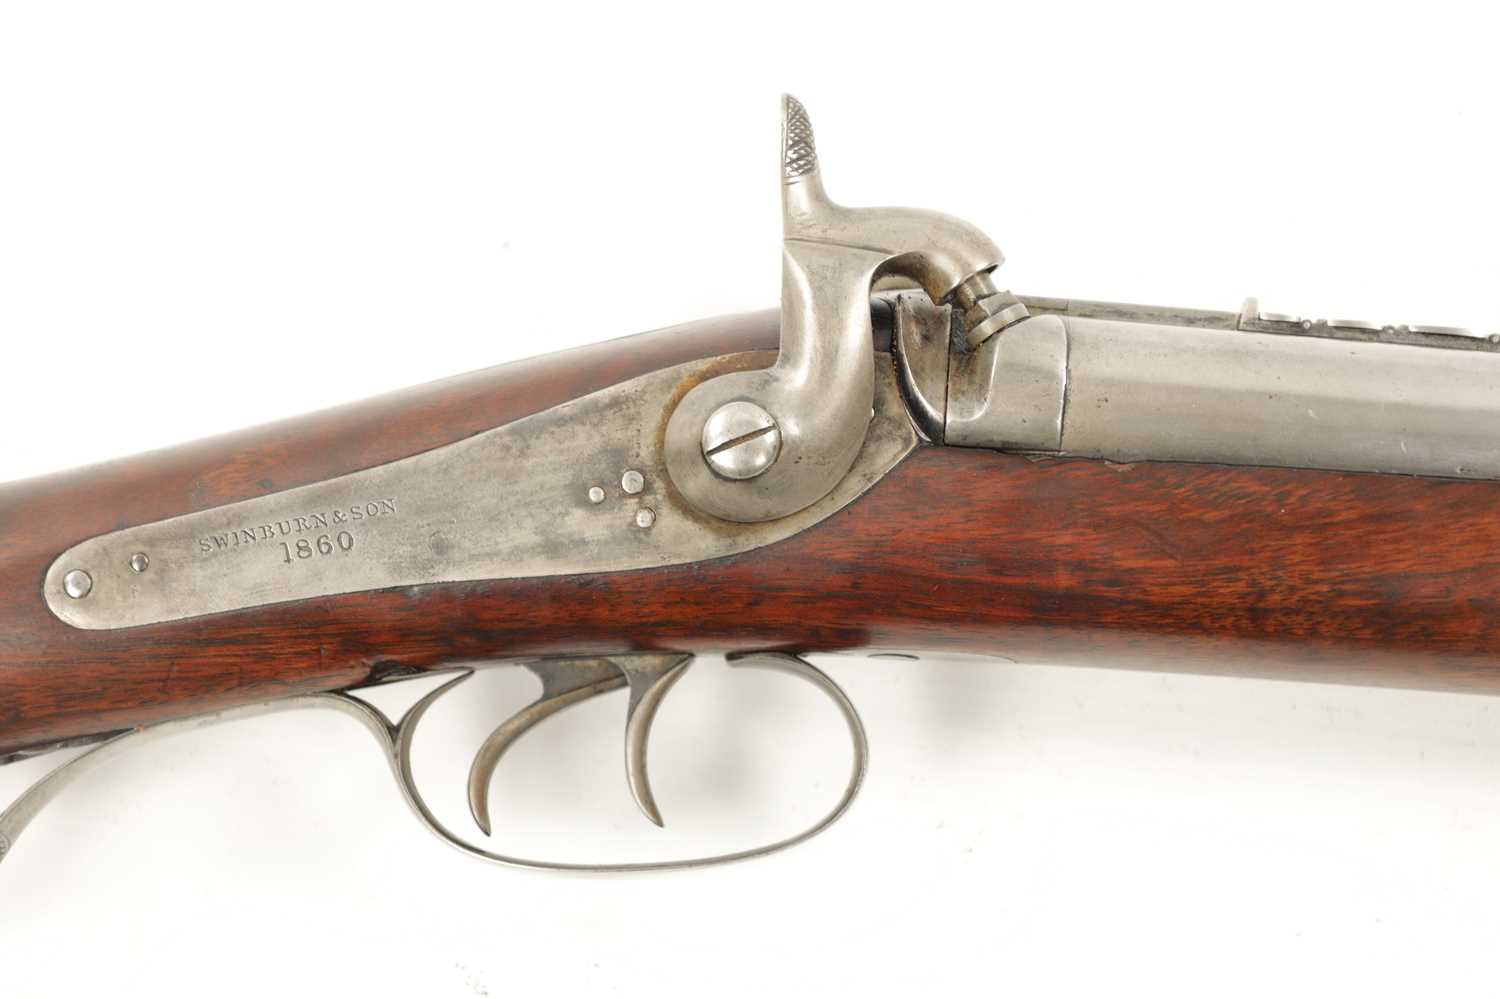 A RARE 19TH CENTURY SWINBURN & SON JACOBS PERCUSSION RIFLE WITH BAYONET - Image 14 of 17